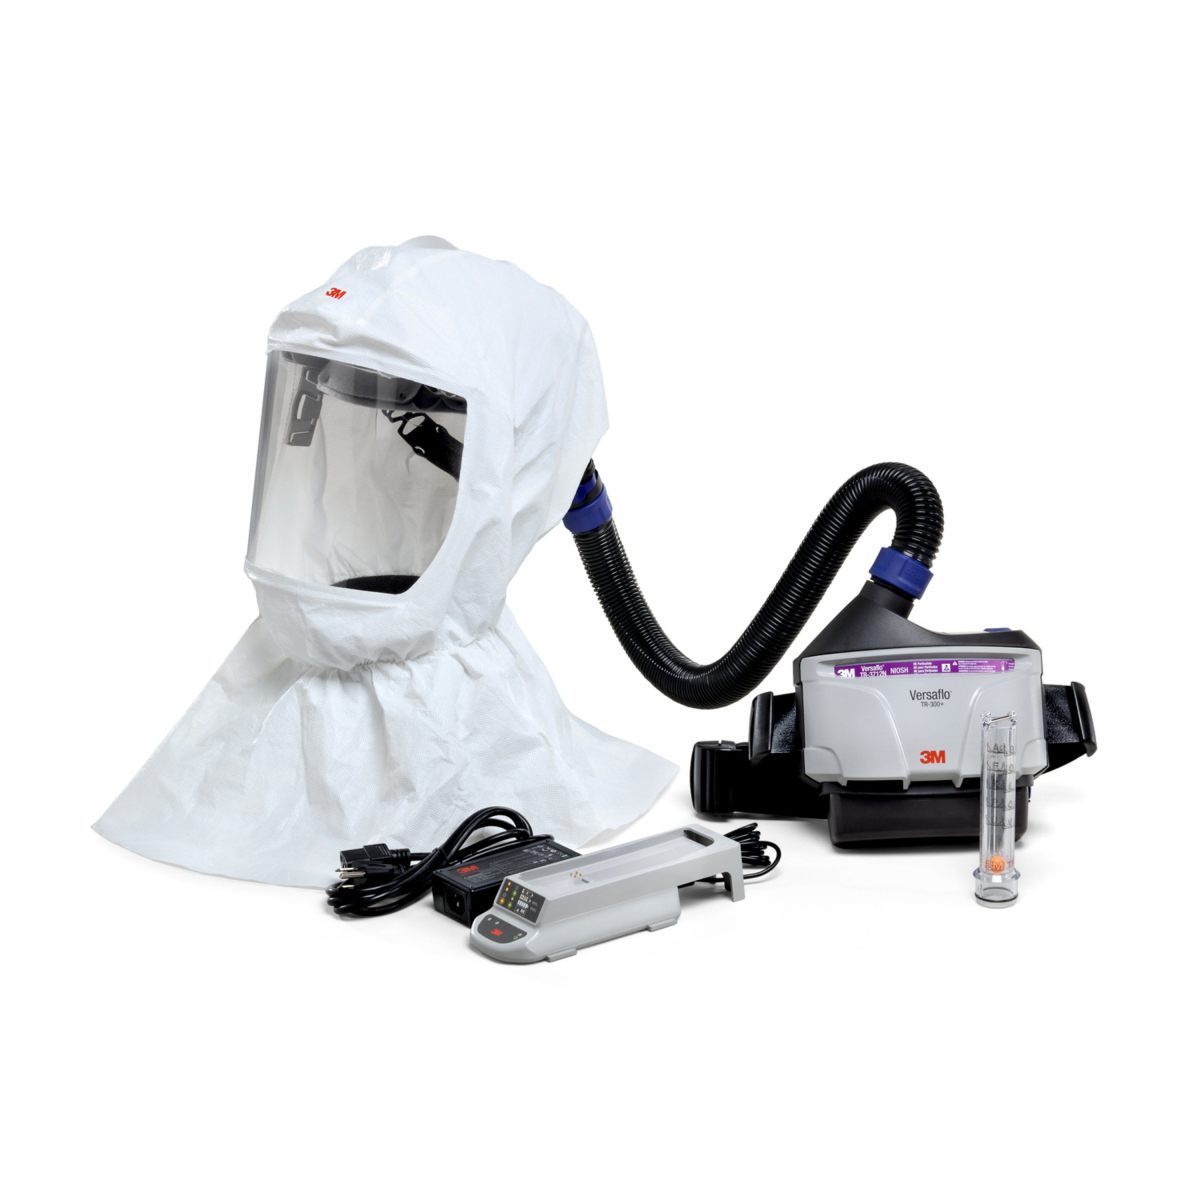 3M™ Versaflo™ Easy Clean PAPR Kit TR-300N+ ECK (Availability restrictions apply.)